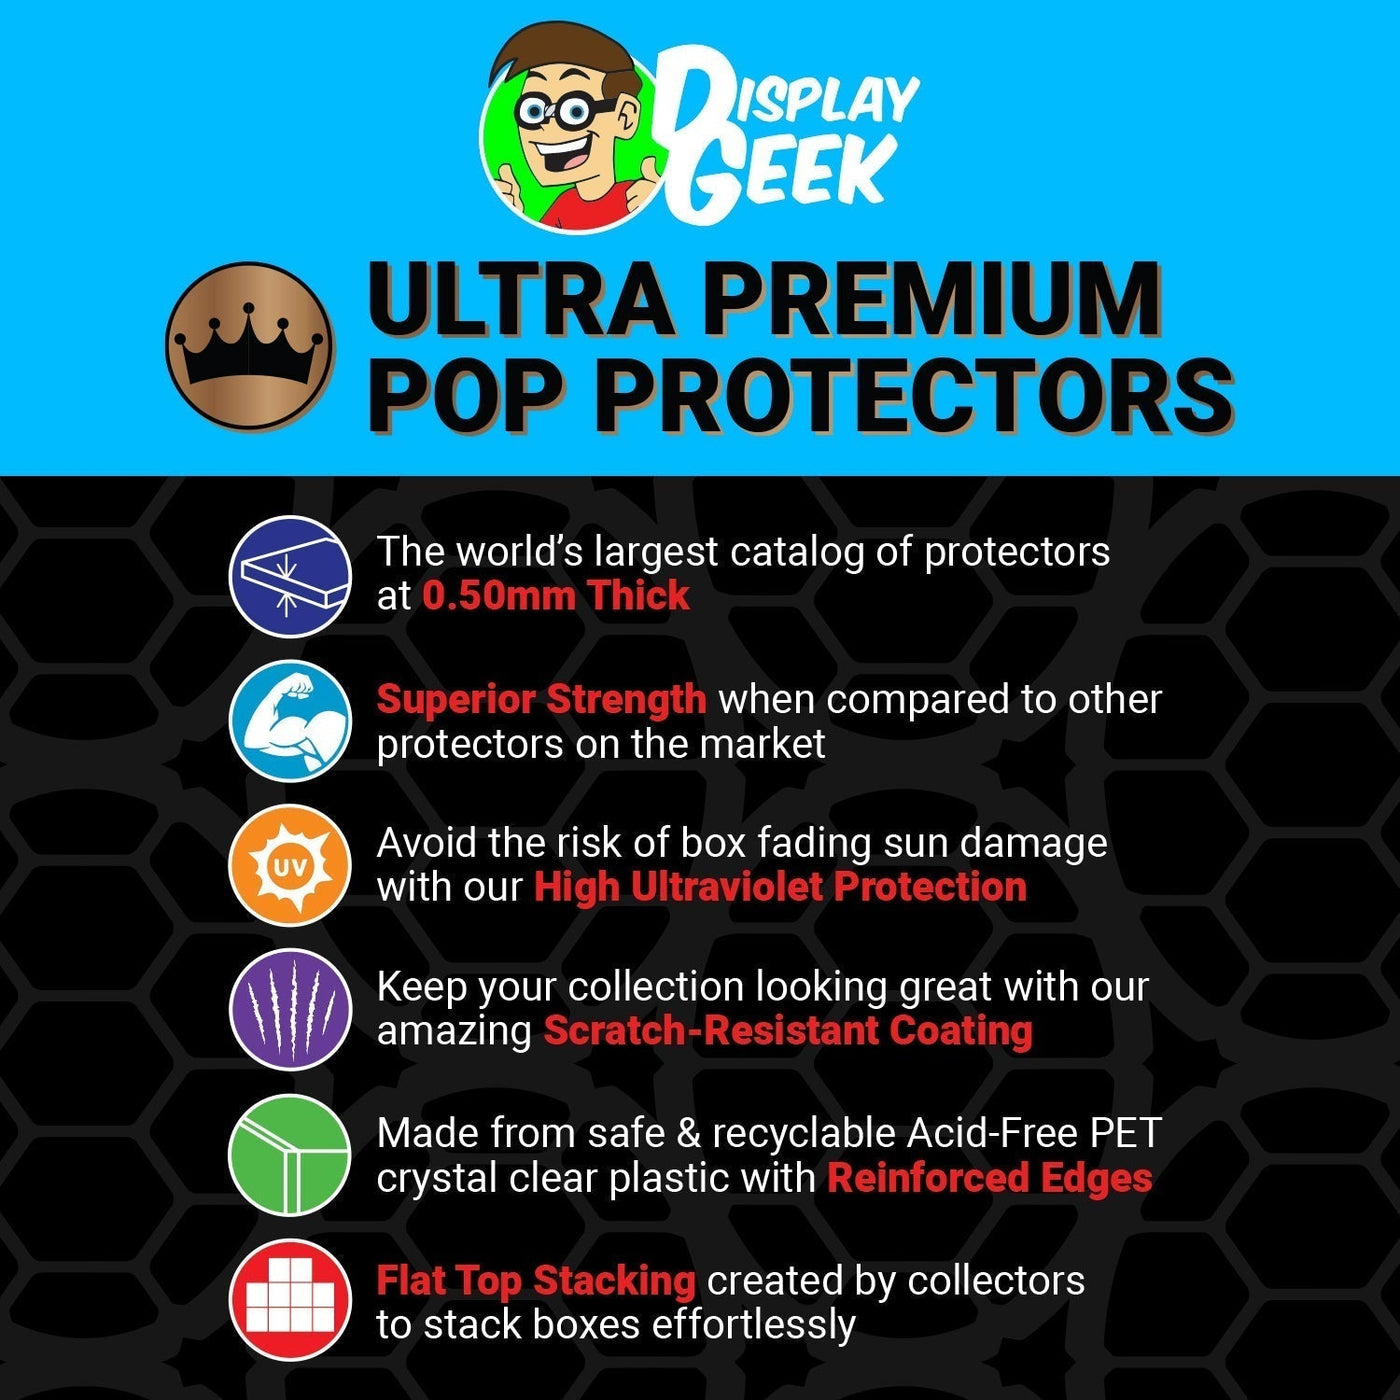 Pop Protector for Amazing Carlos D-Con FunkO's Cereal Box on The Protector Guide App by Display Geek